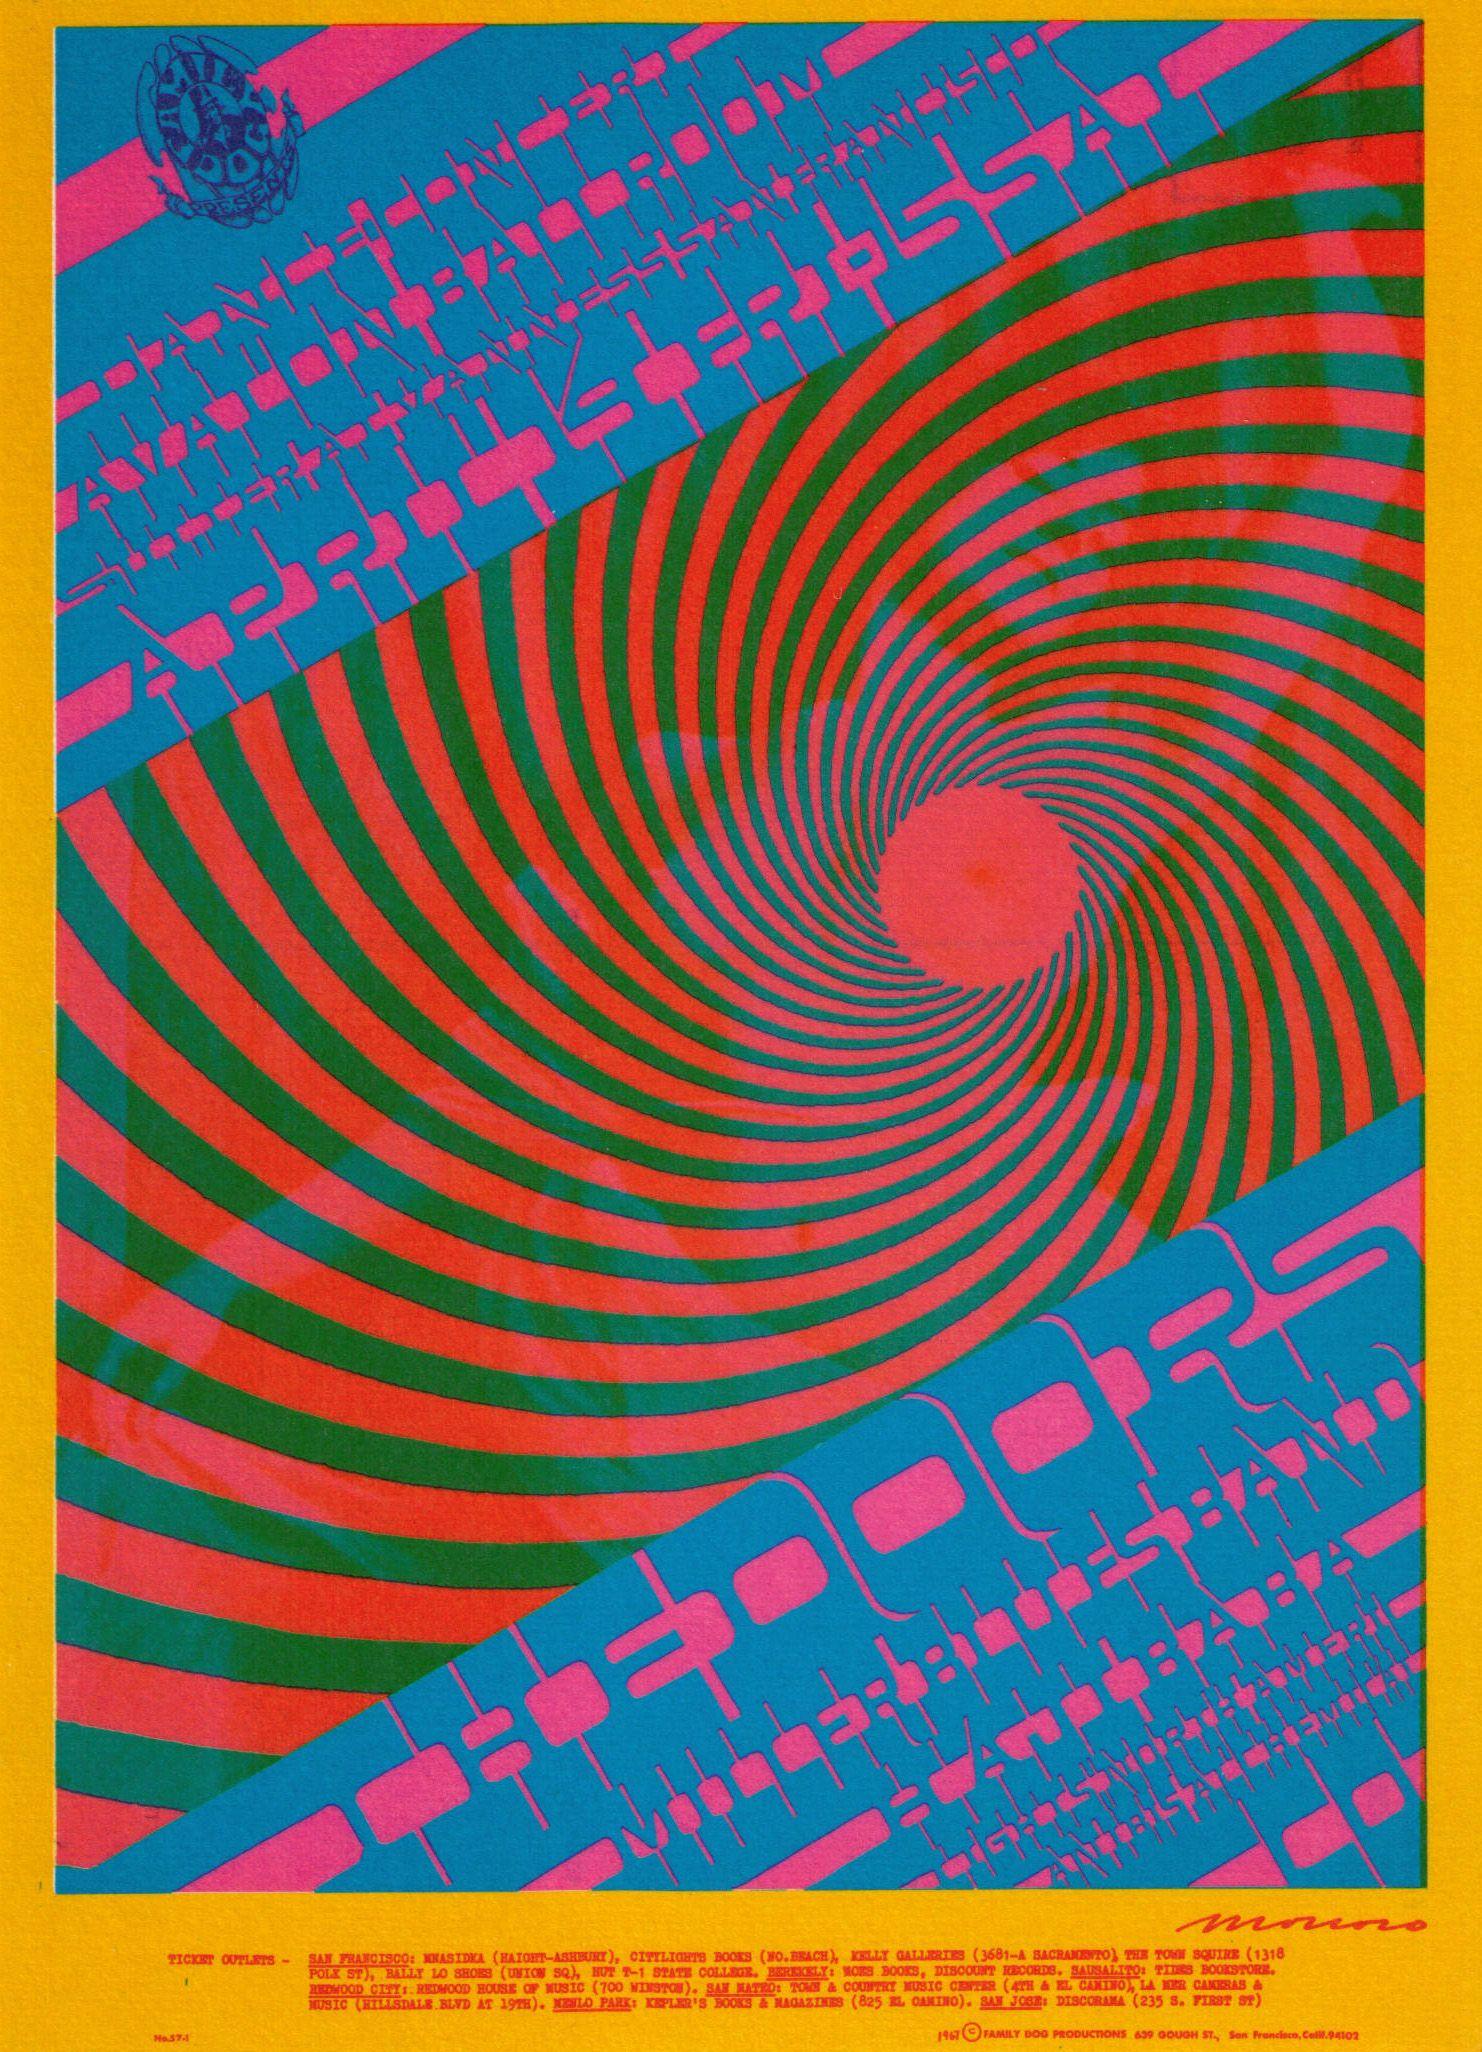 THE DOORS Concert Posters of the 60's and 70's!